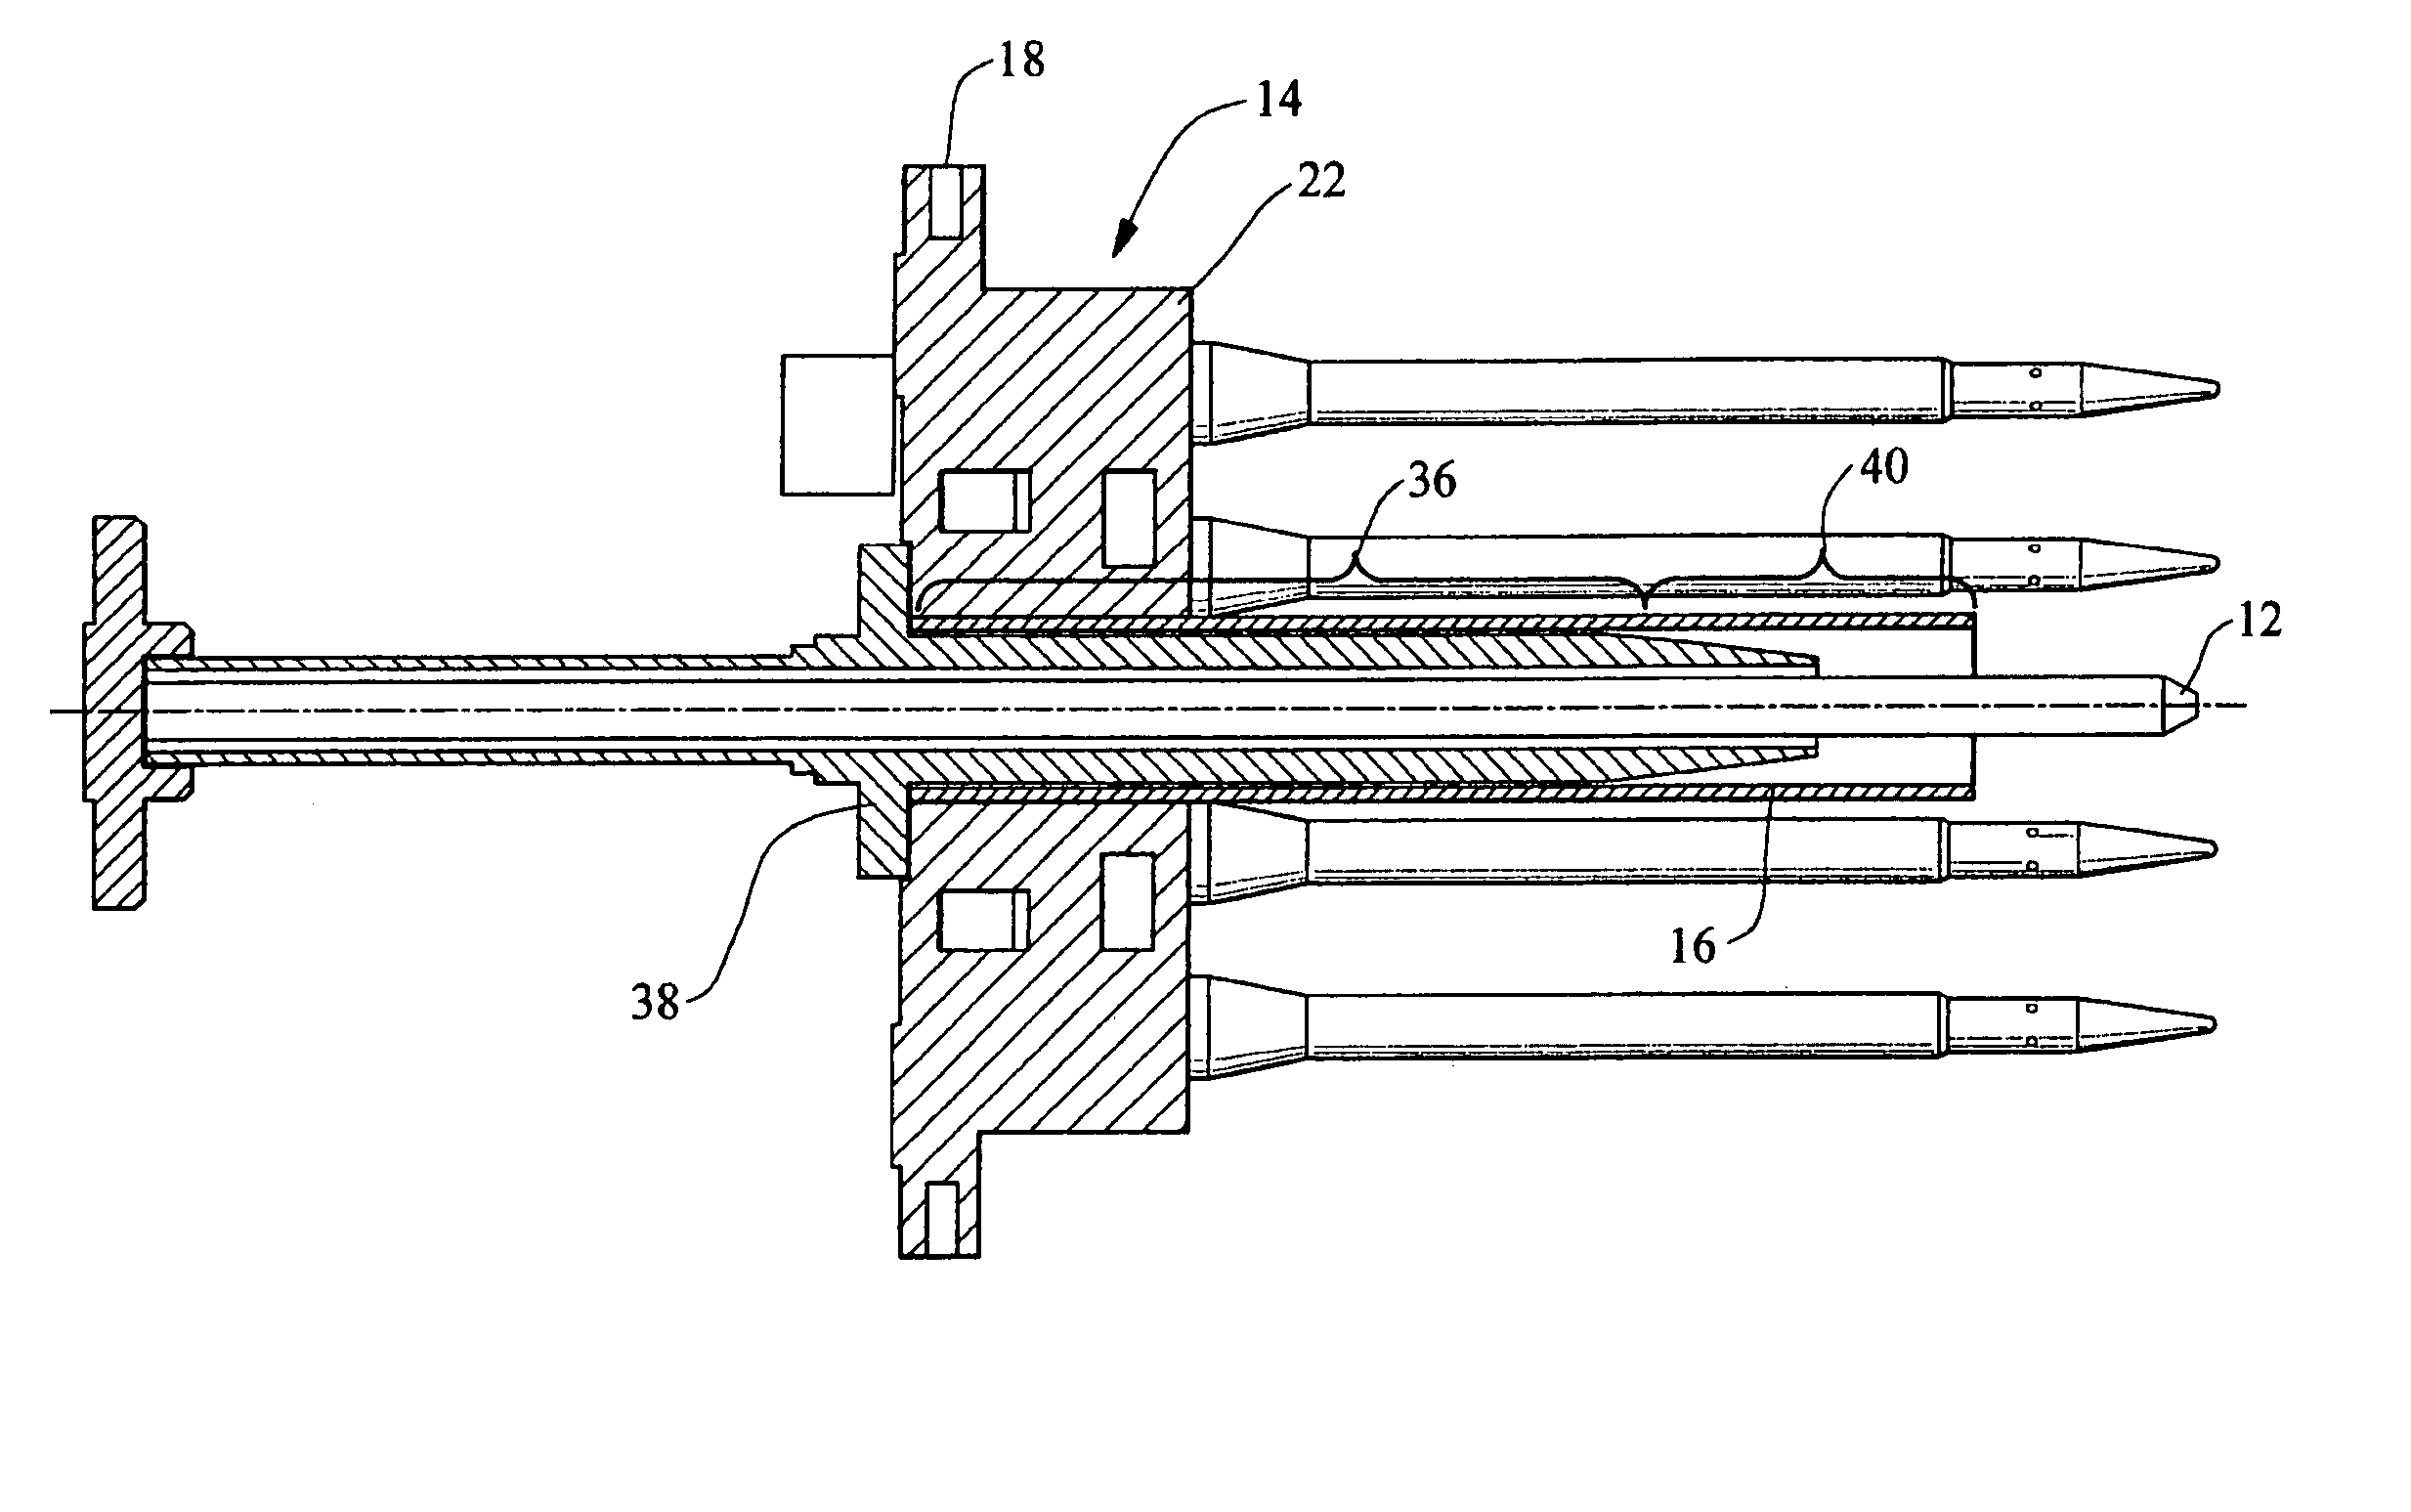 Support system for a pilot nozzle of a turbine engine